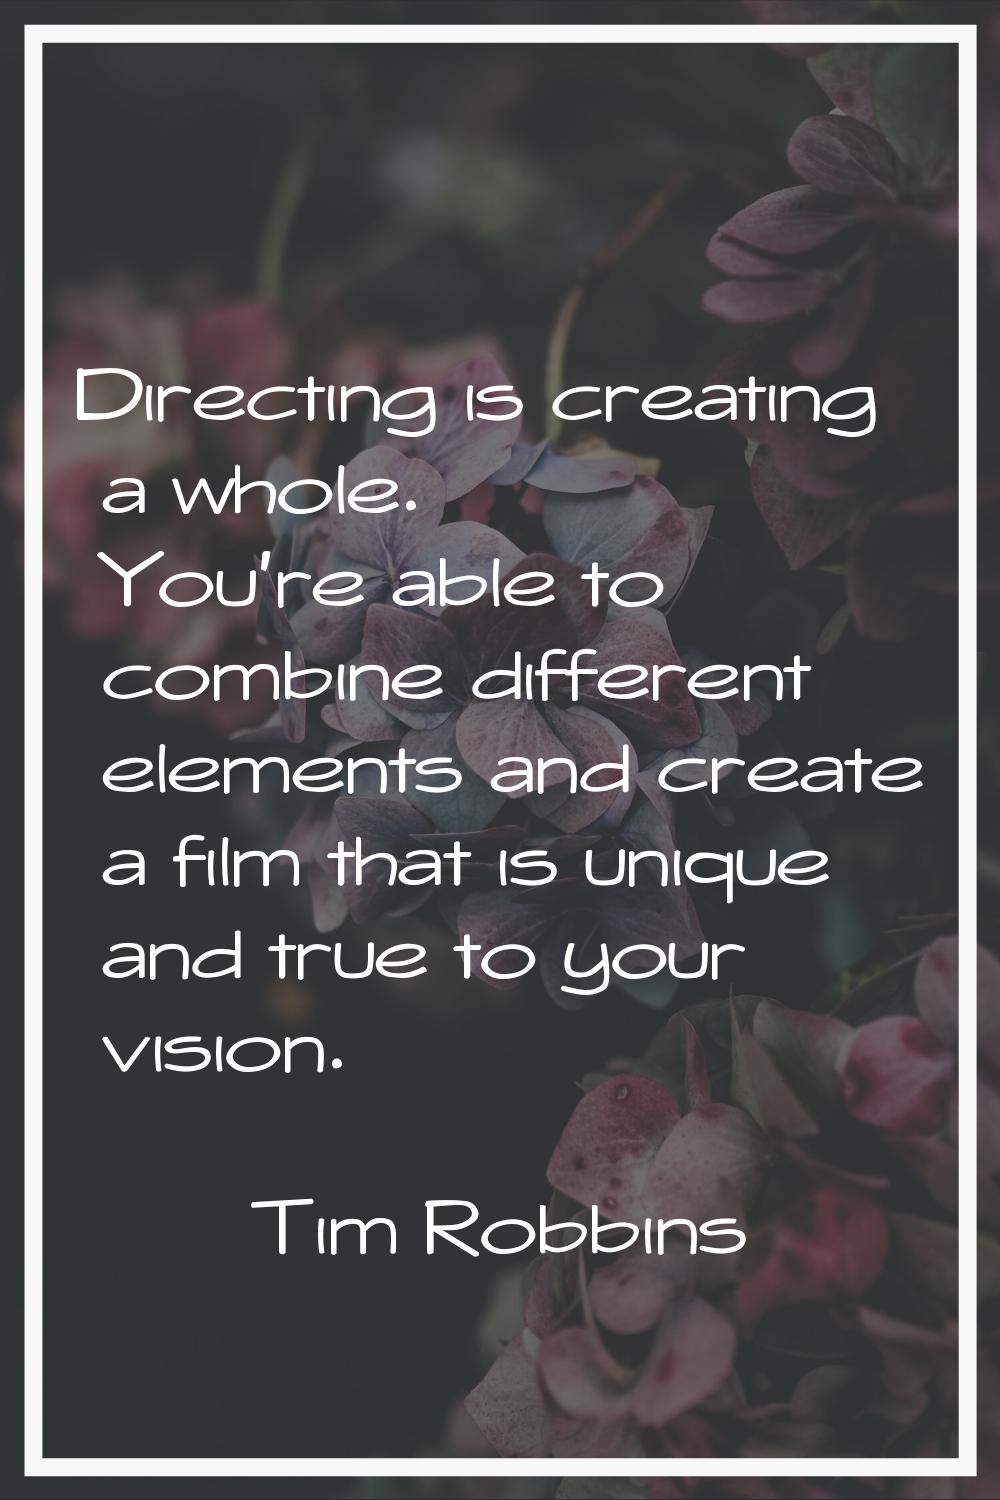 Directing is creating a whole. You're able to combine different elements and create a film that is 